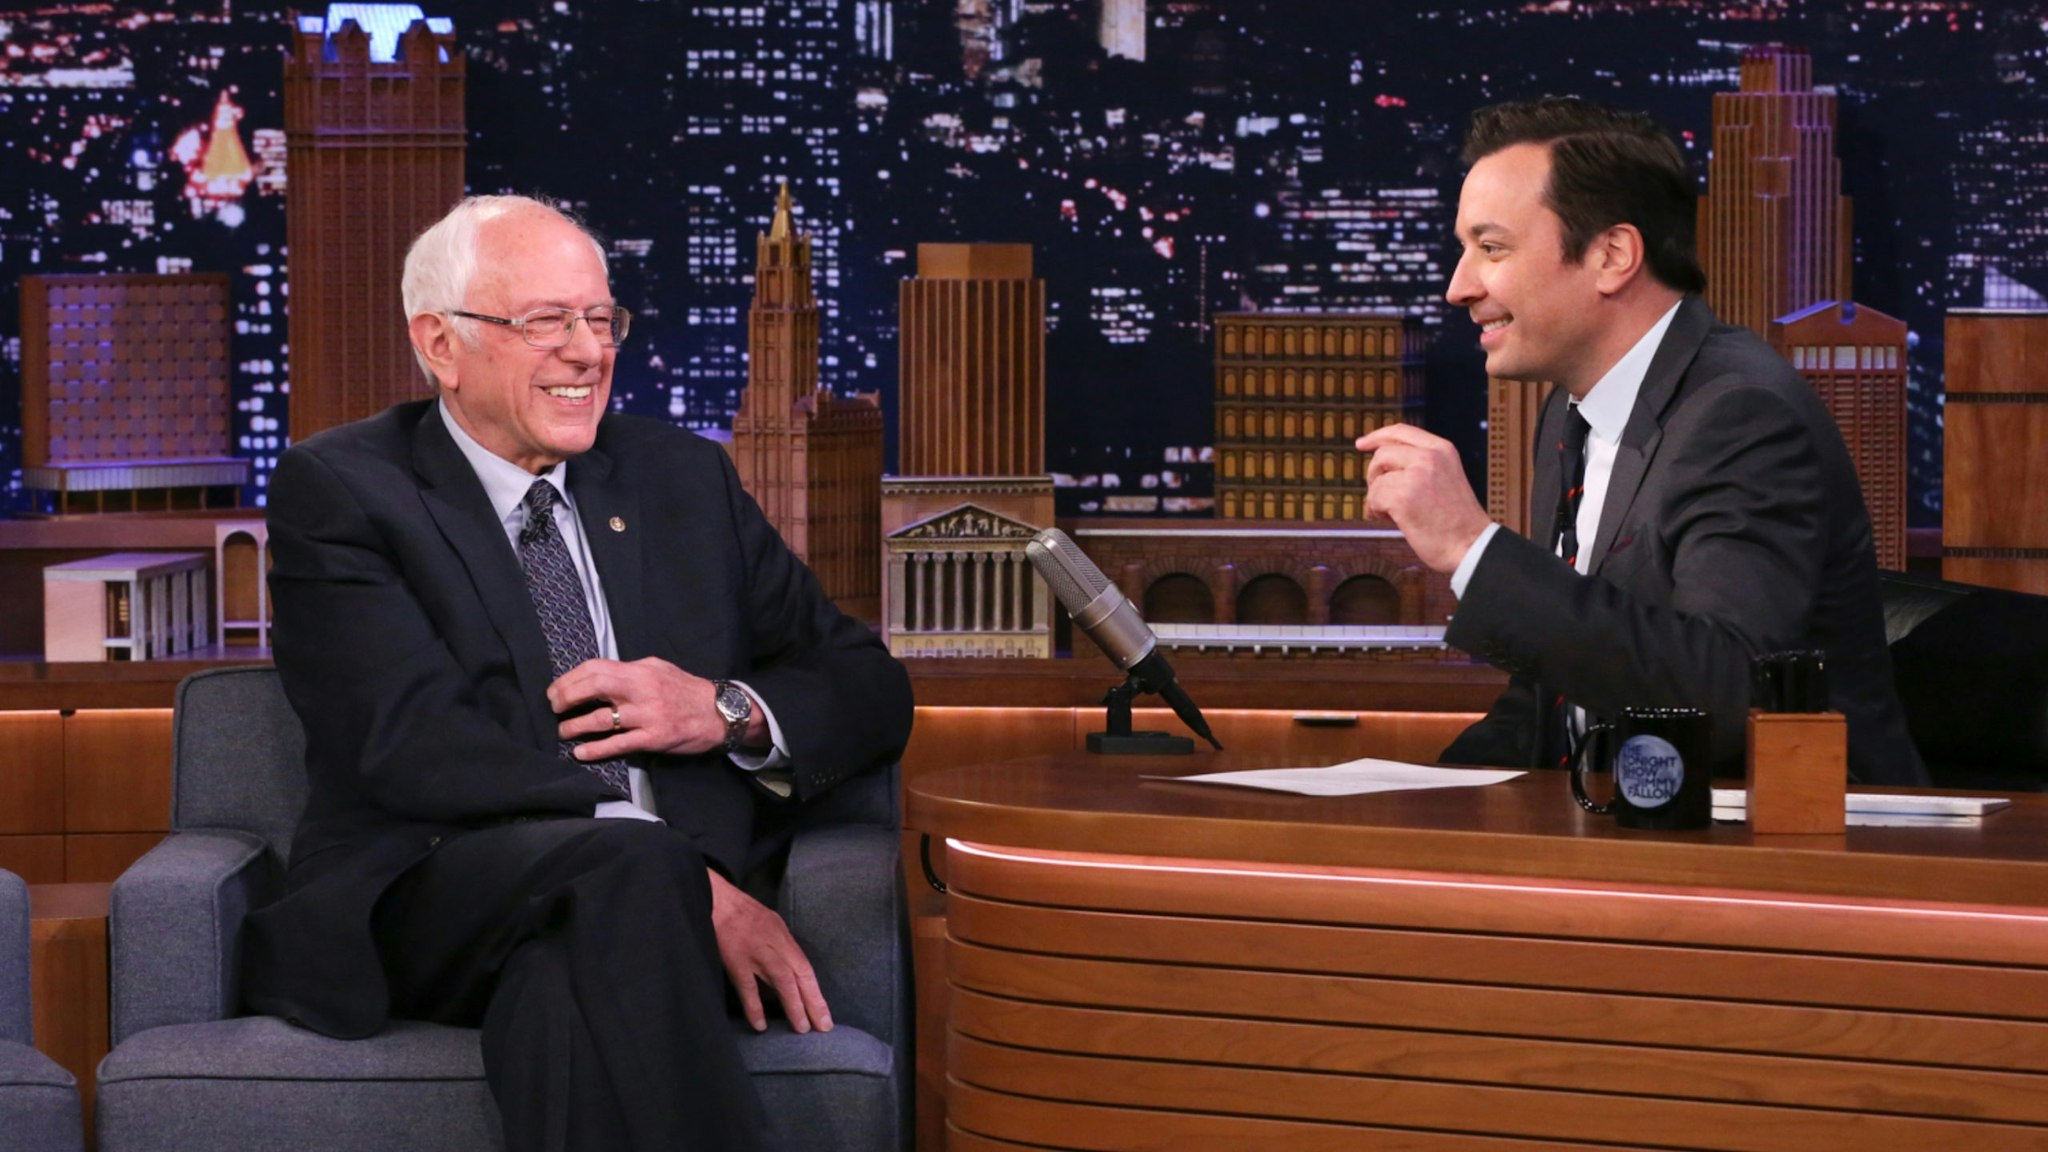 Senator Bernie Sanders during an interview with host Jimmy Fallon on March 11, 2020.